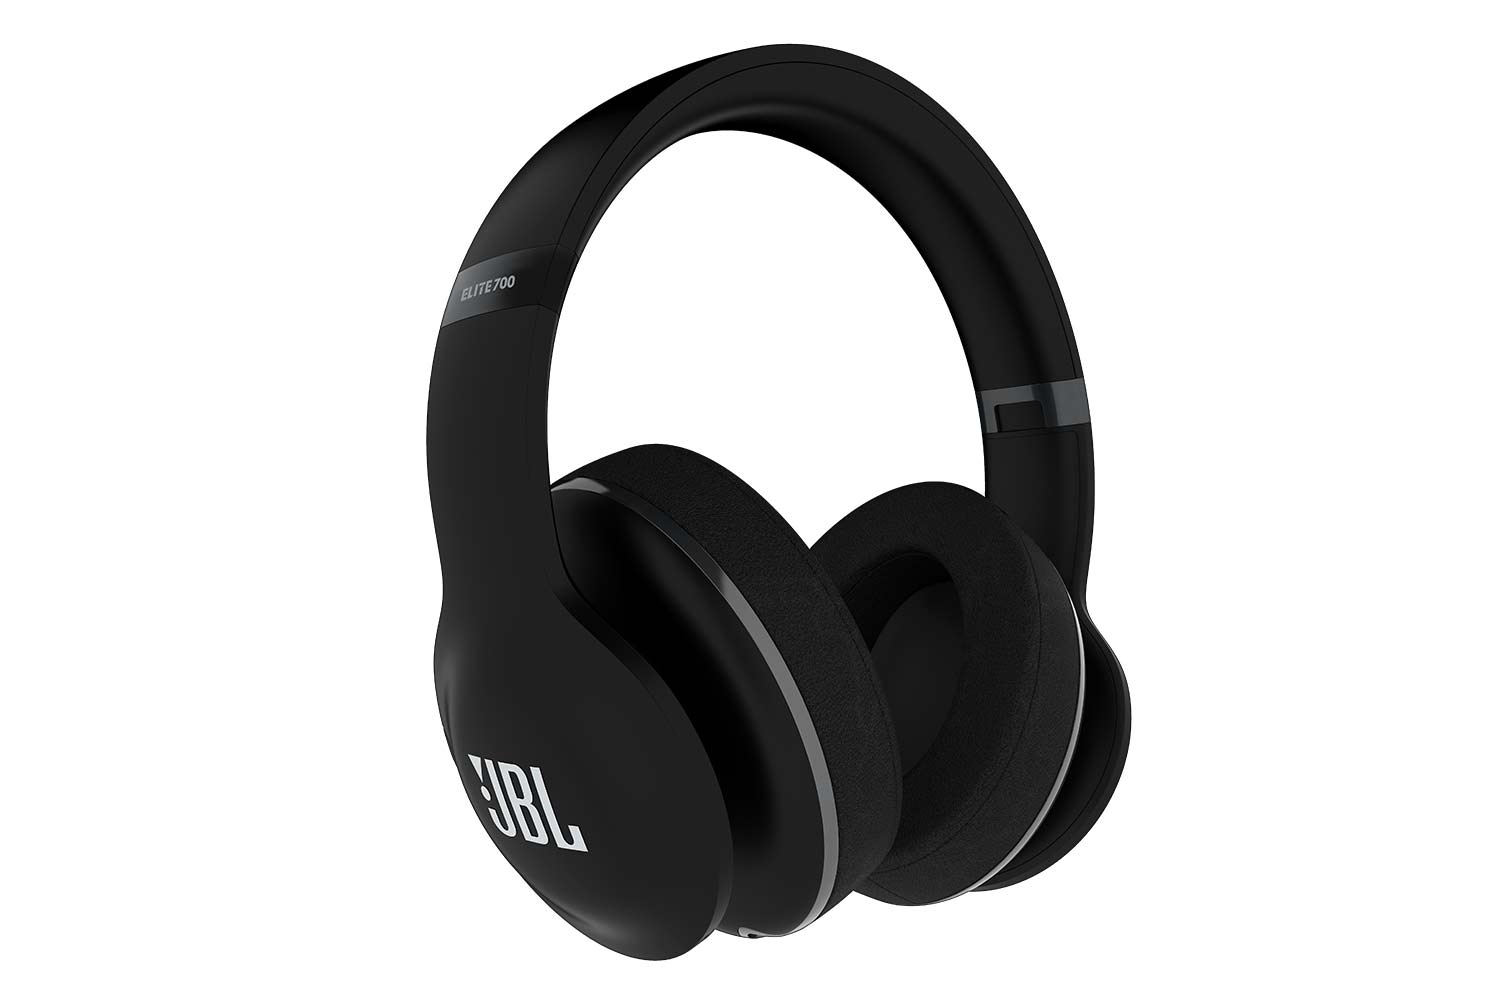 jbl new headphones ifa everest reflect grip noise cancelling bluetooth large elite700  ae anc black frontright